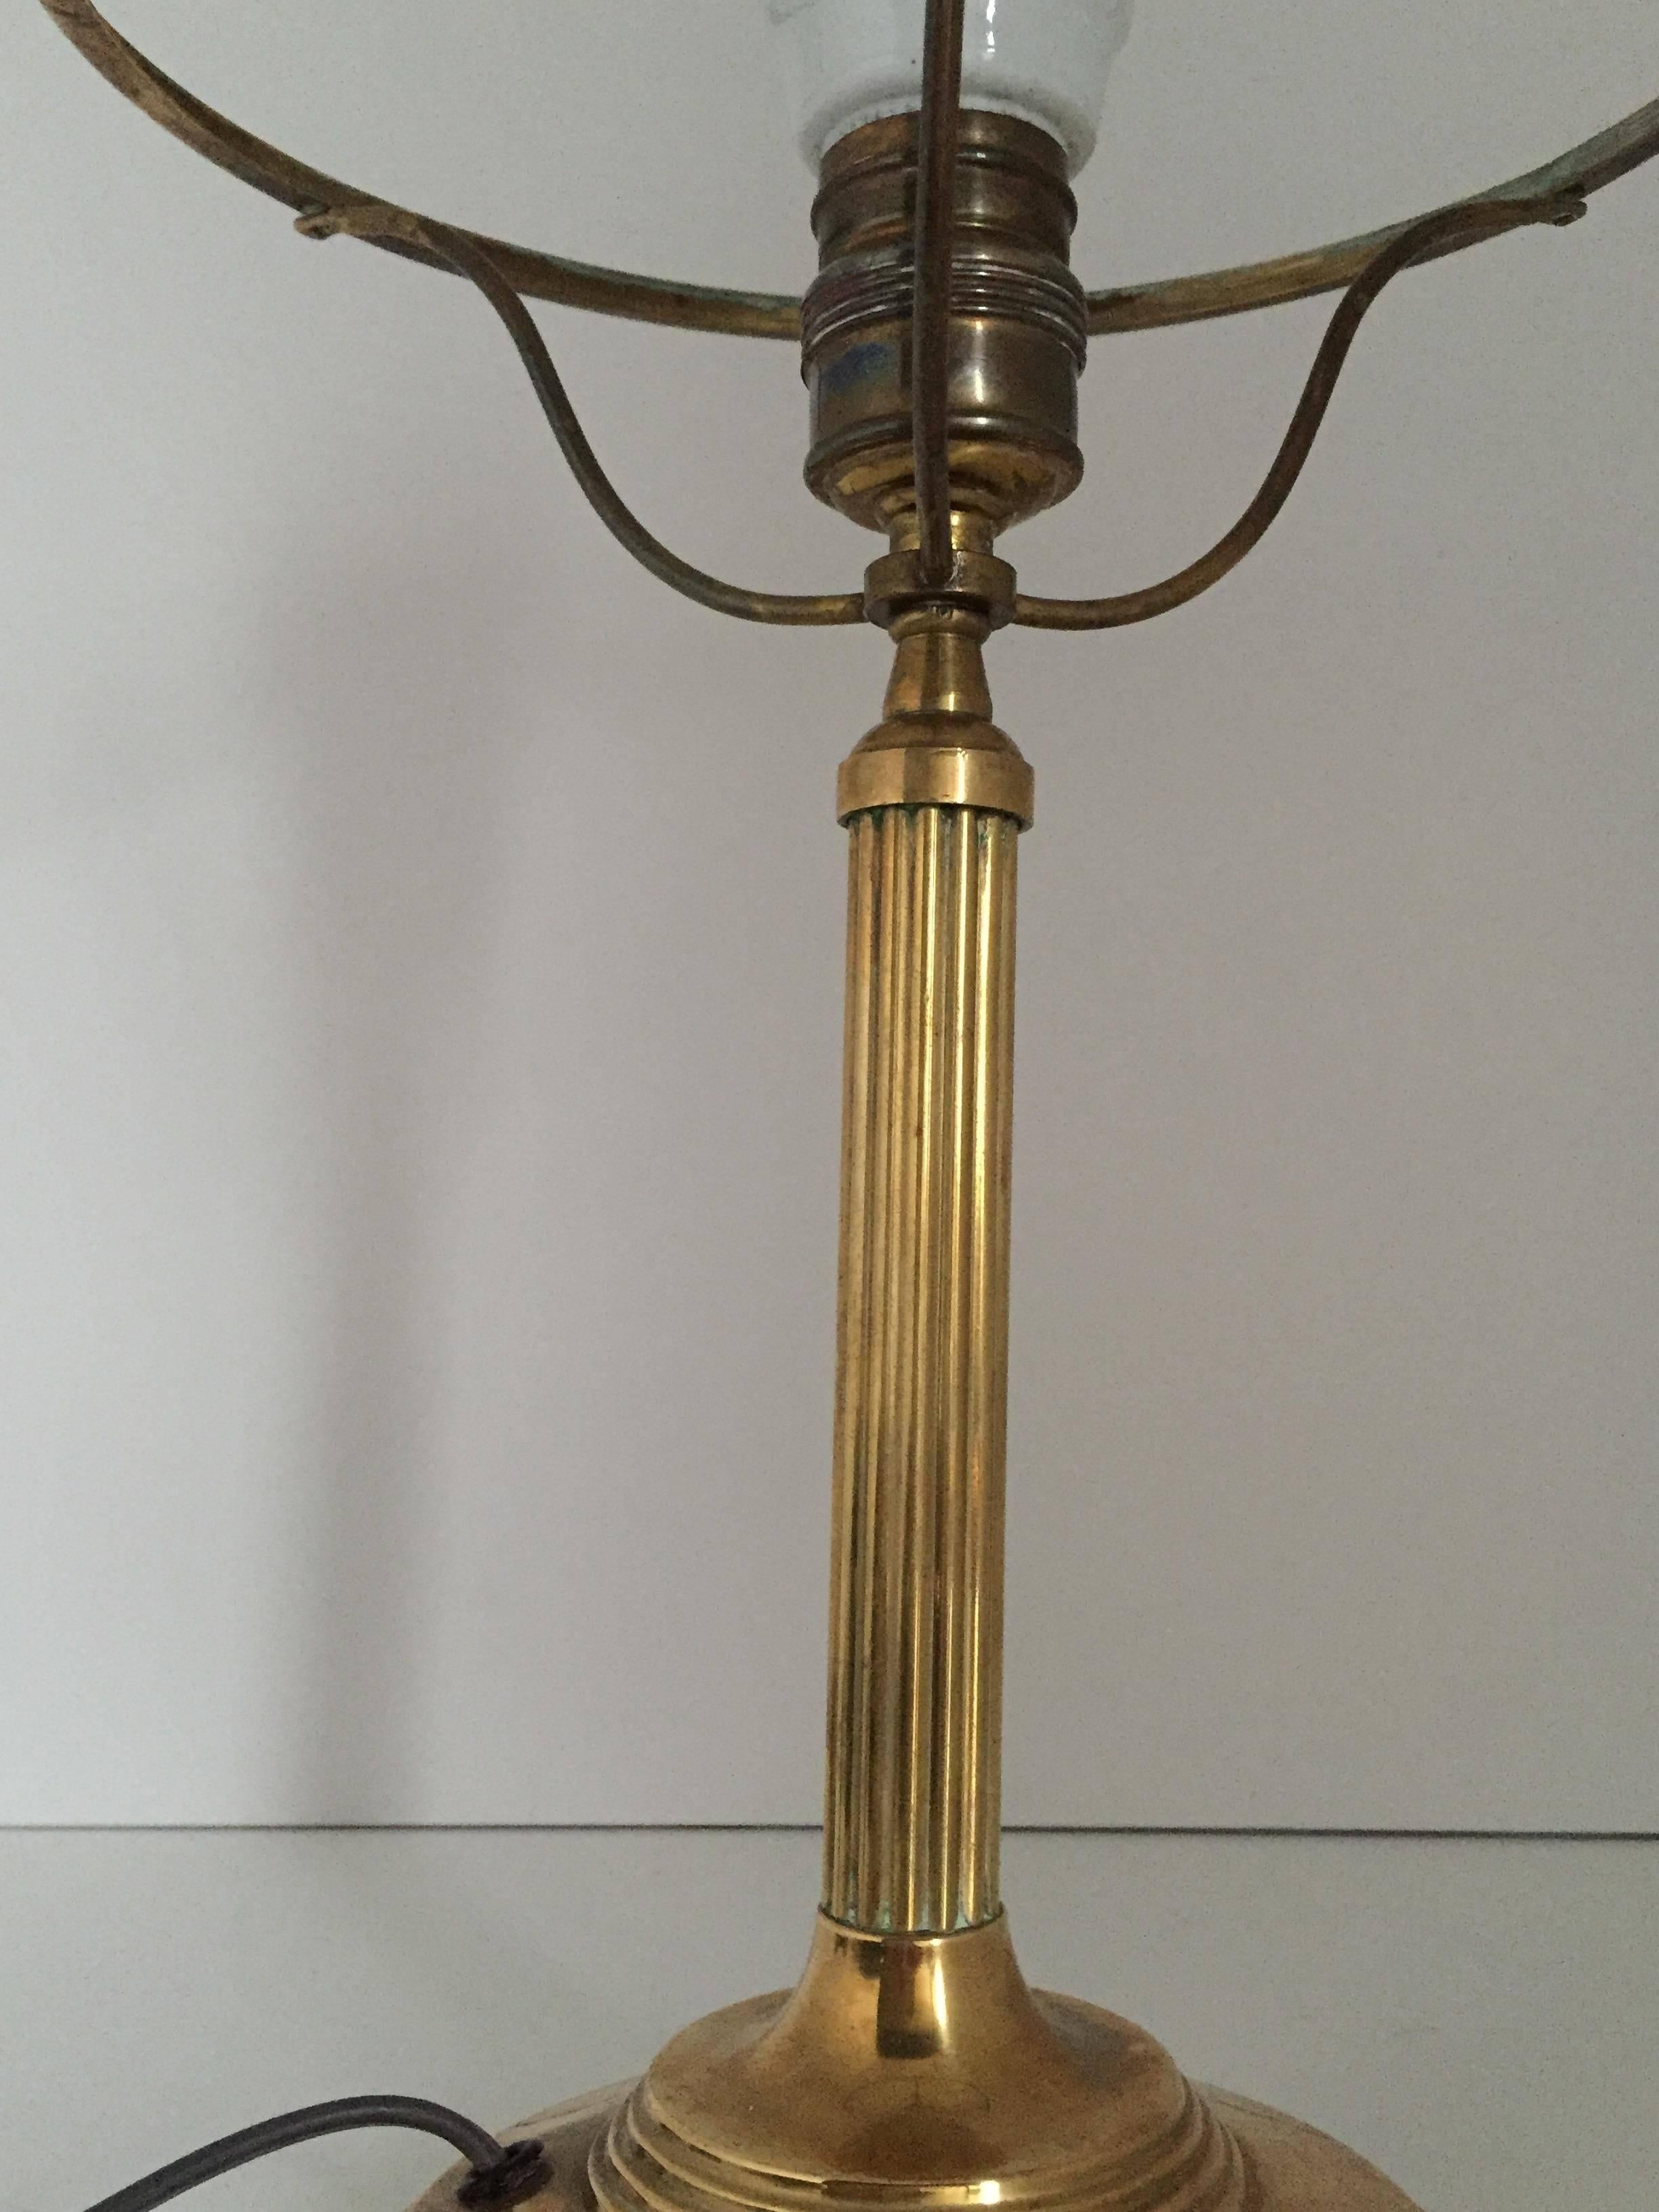 1925 Swedish Grace Art Nouveau Jugend Brass and Glass Lamp In Excellent Condition For Sale In Drottningholm, SE